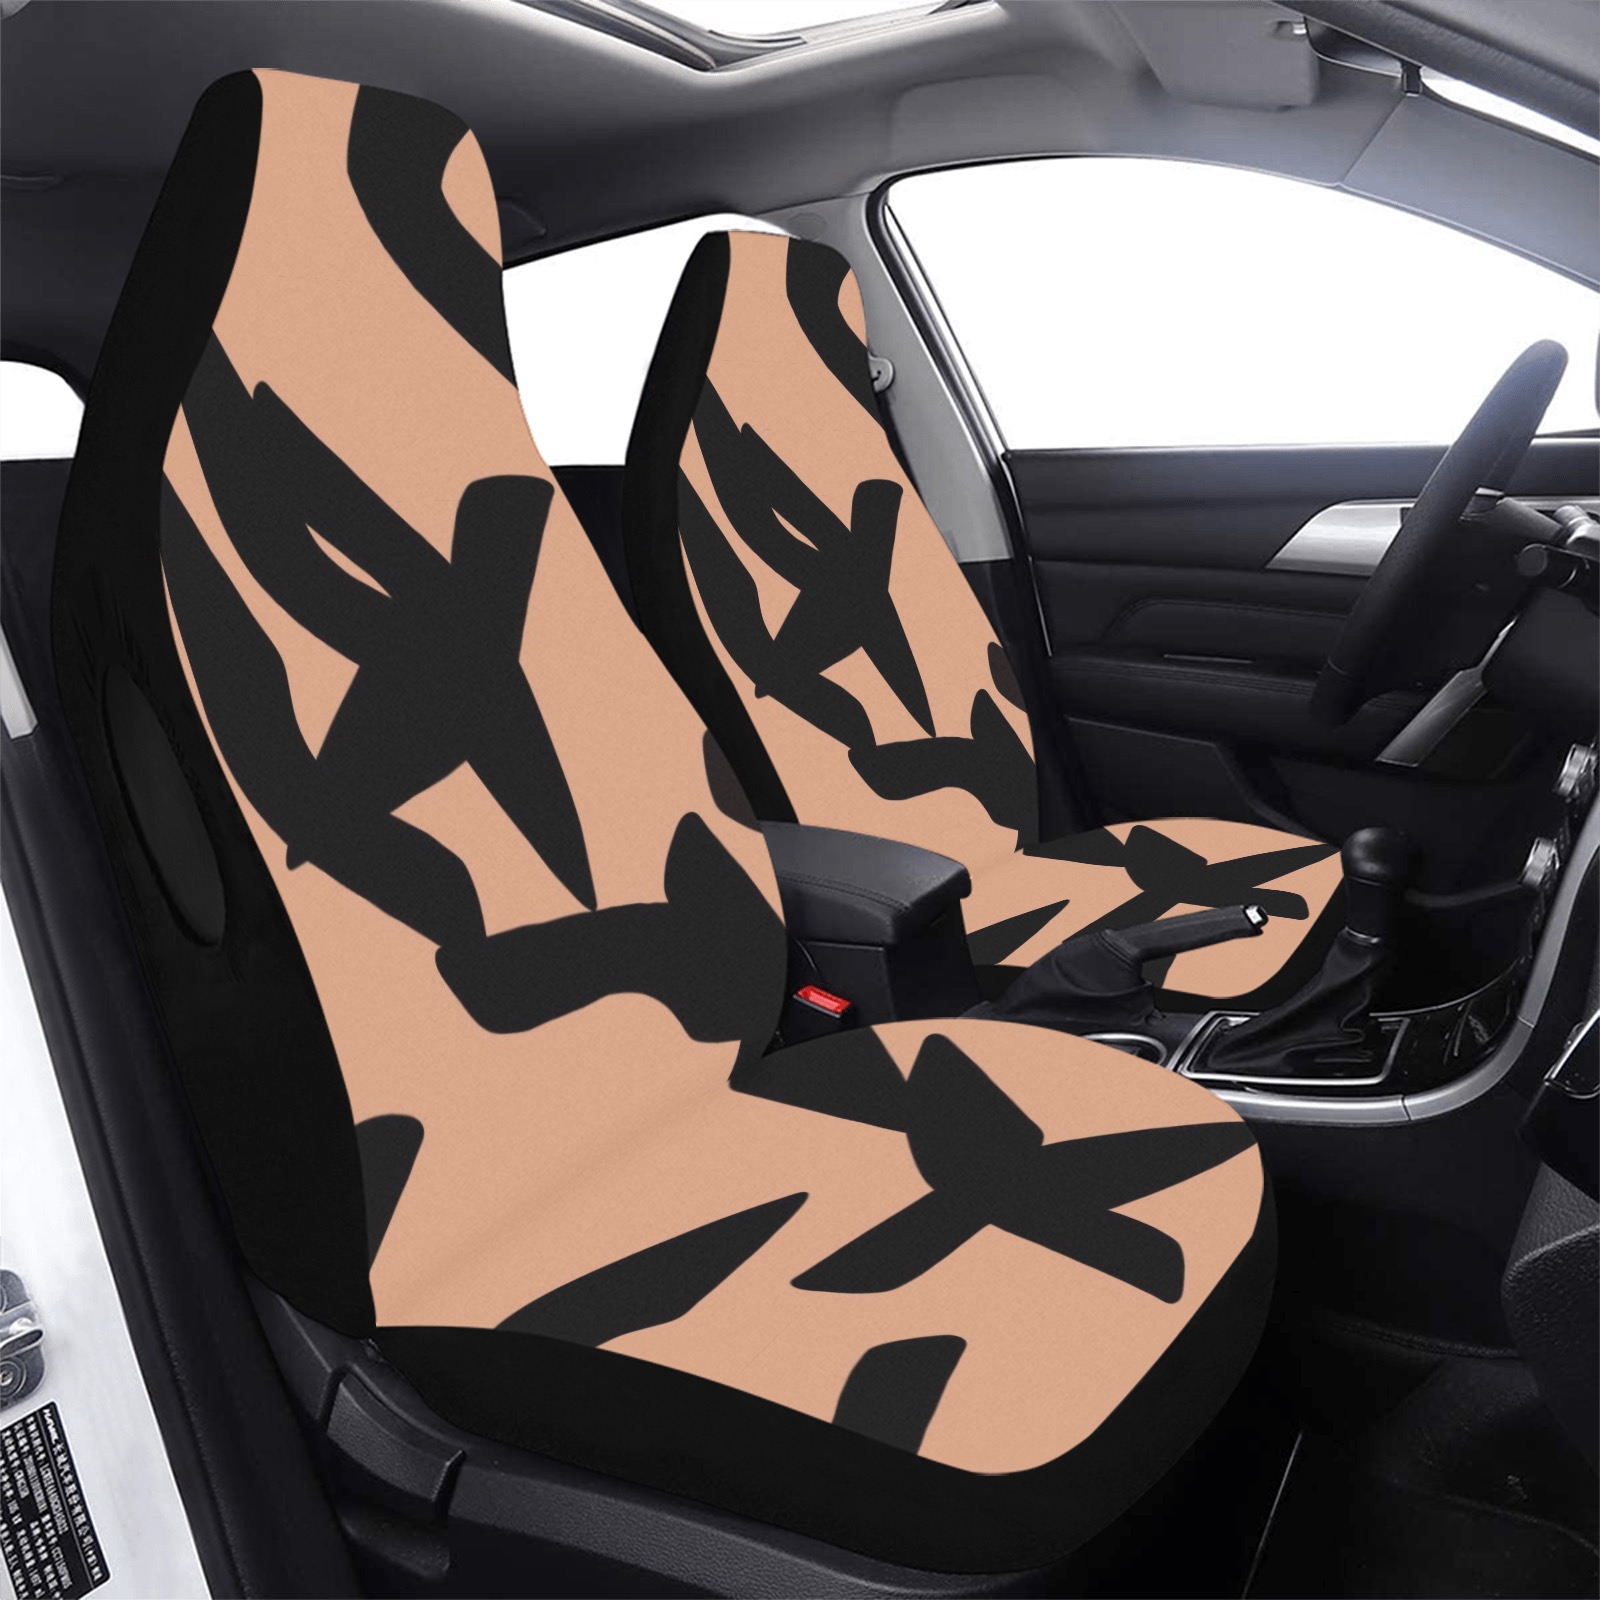 Orange car seat covers Car Seat Cover Airbag Compatible (Set of 2)